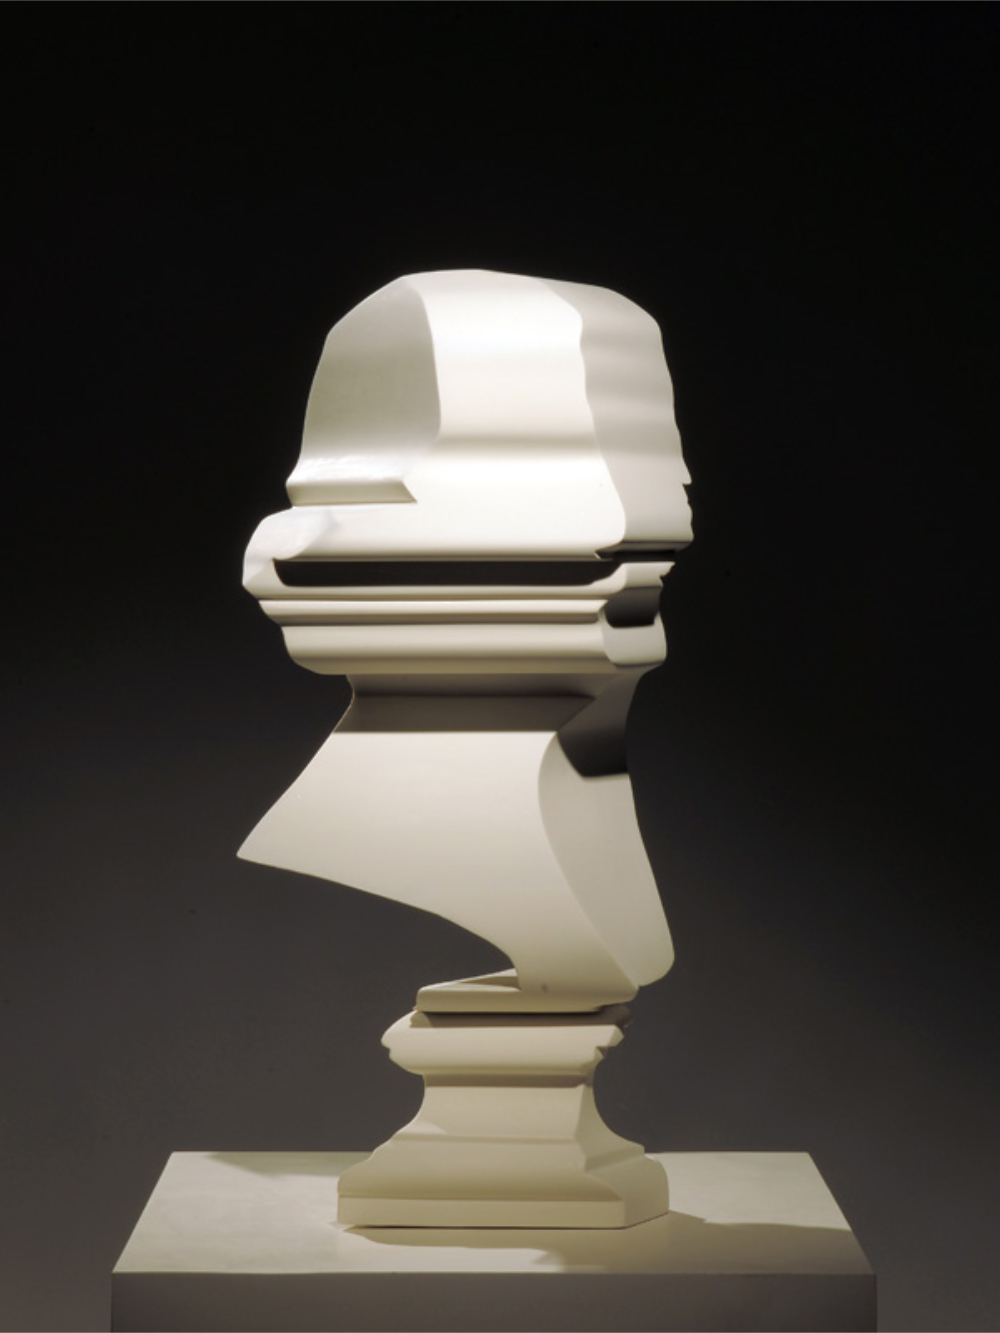 Uneasy lies the head that wears a crown, 2010, Nick Hornby. Marble resin composite.